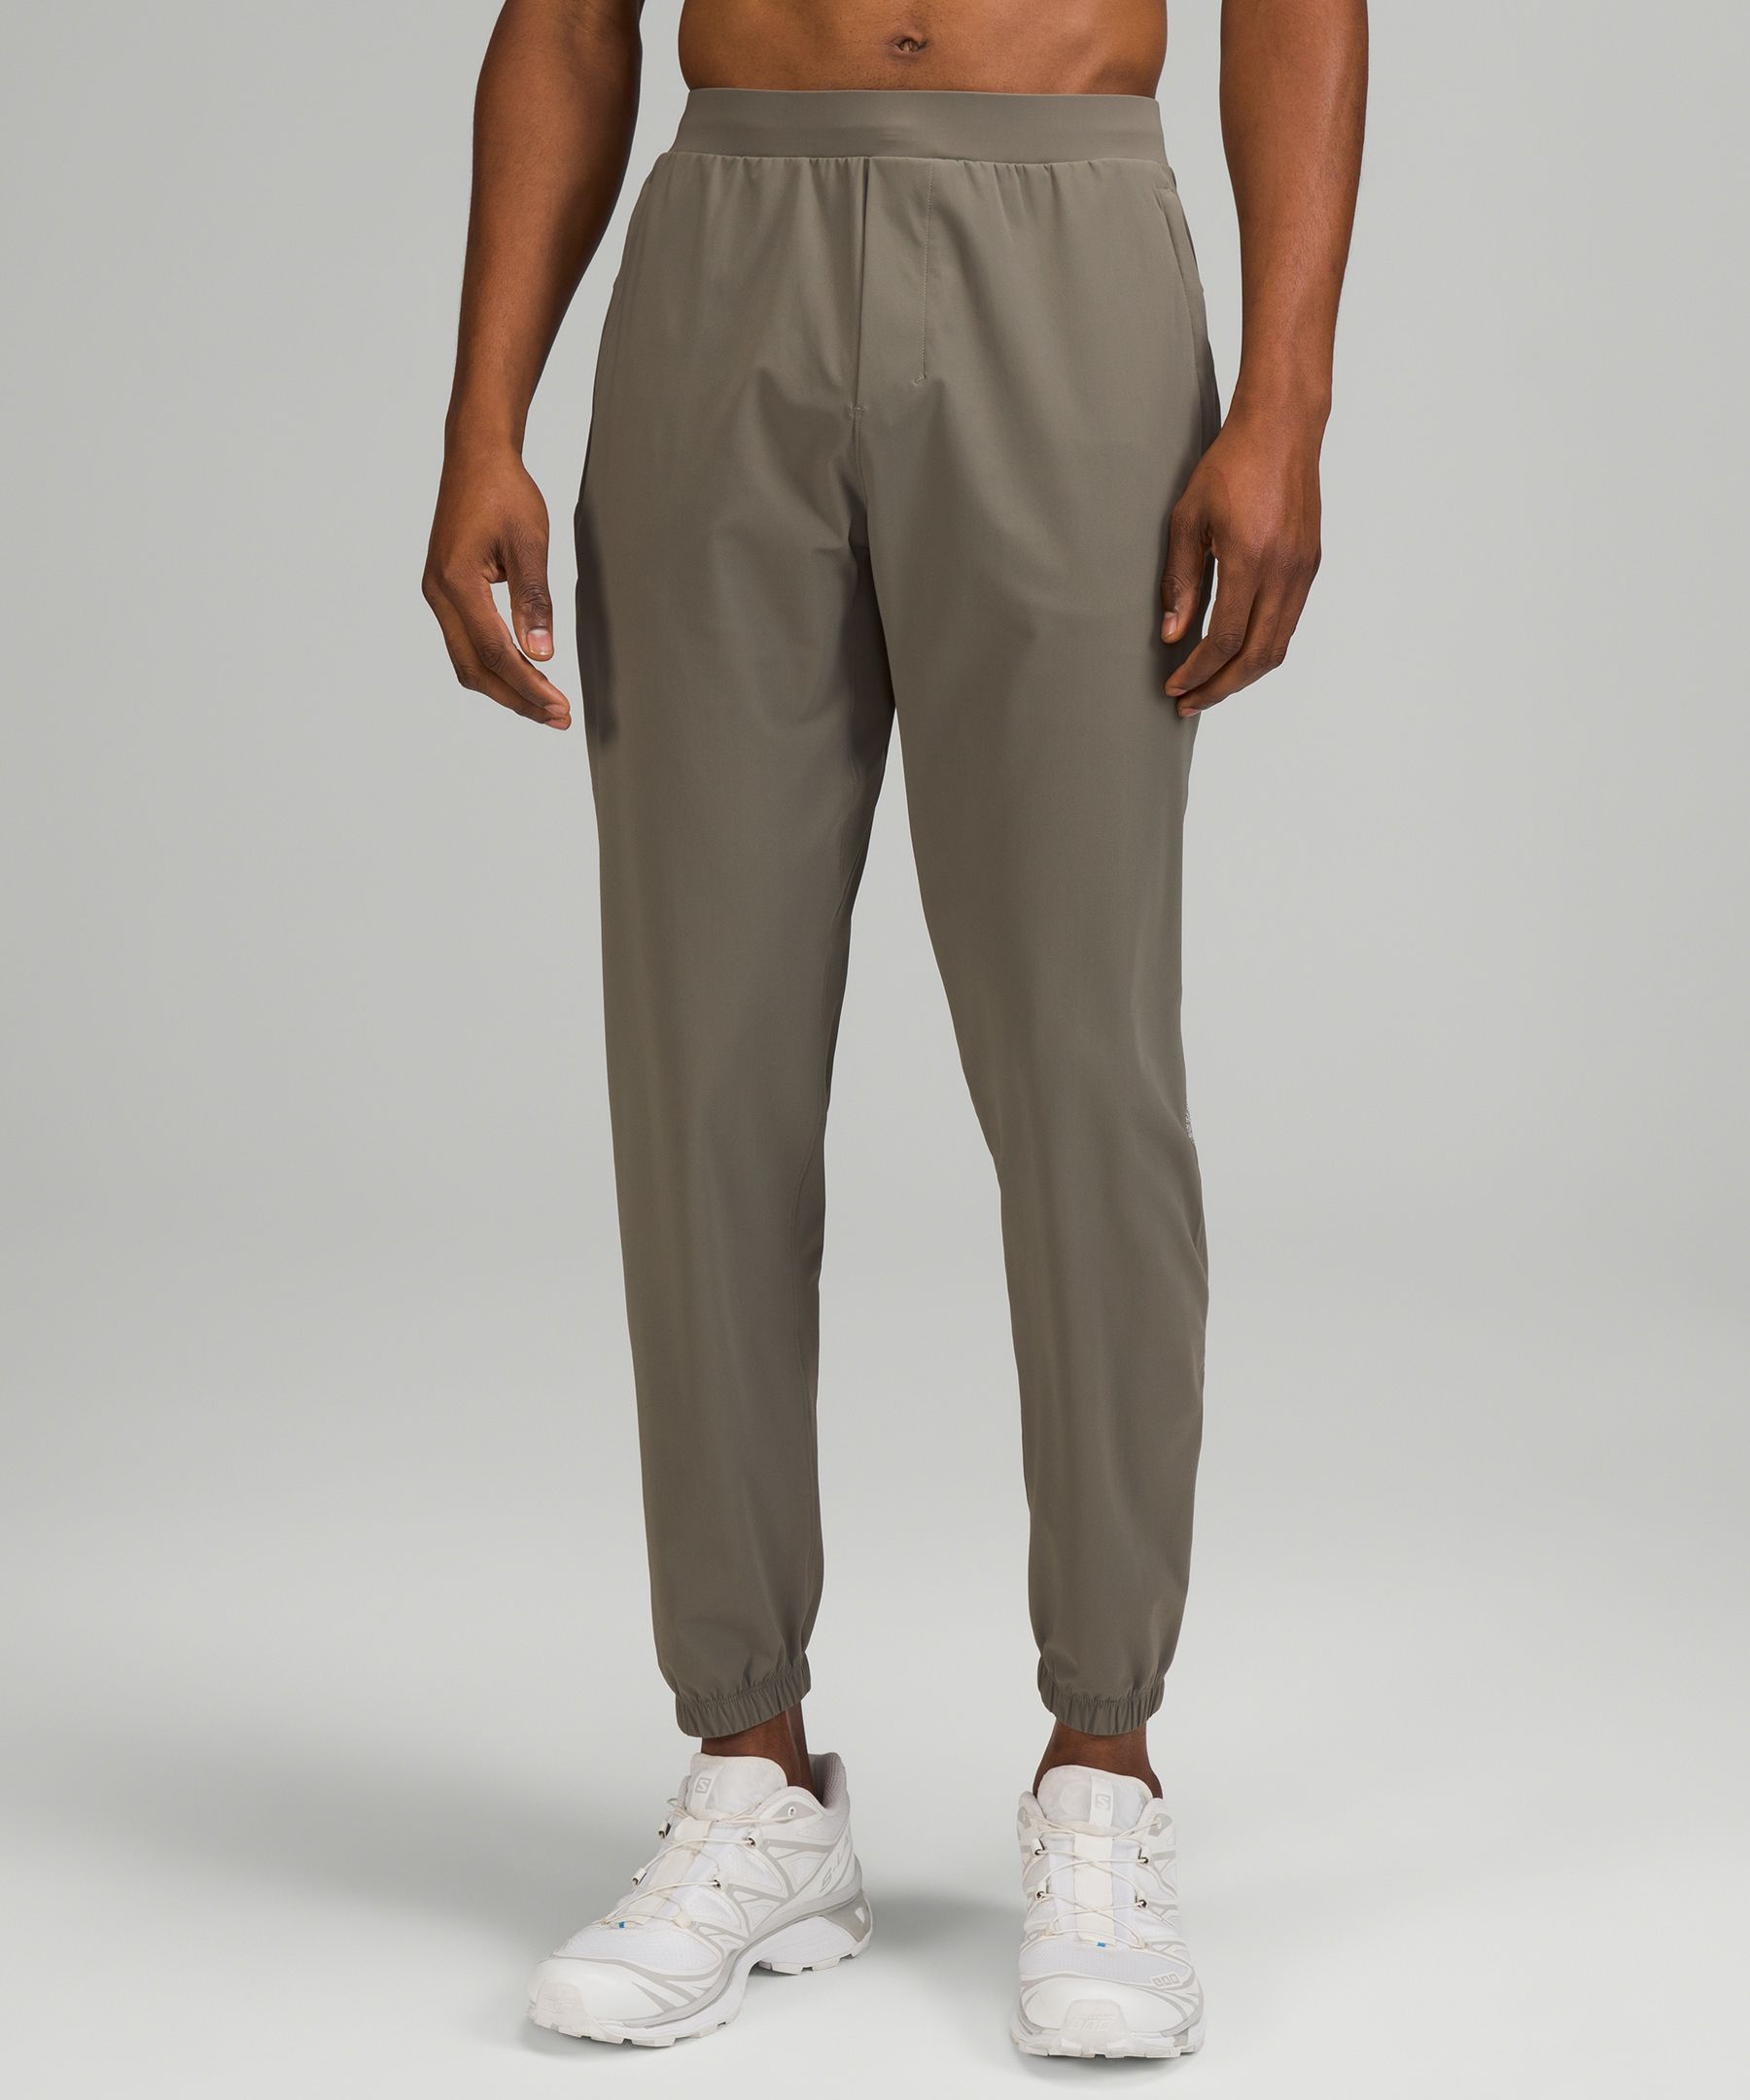 Lululemon Surge Joggers Tall In Rover